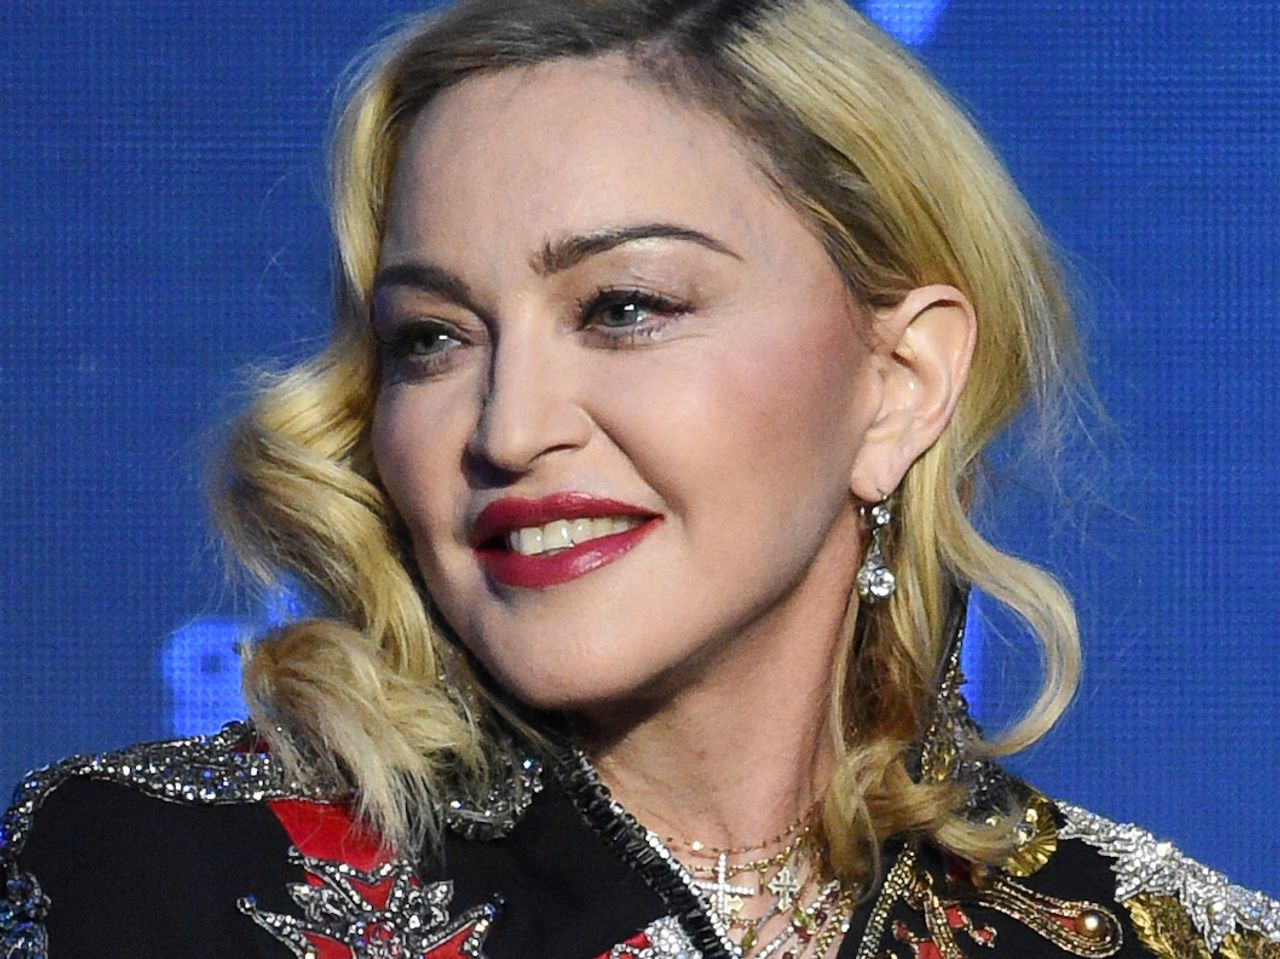 Madonna Hospitalized Due to Bacterial Infection, Tour Postponed